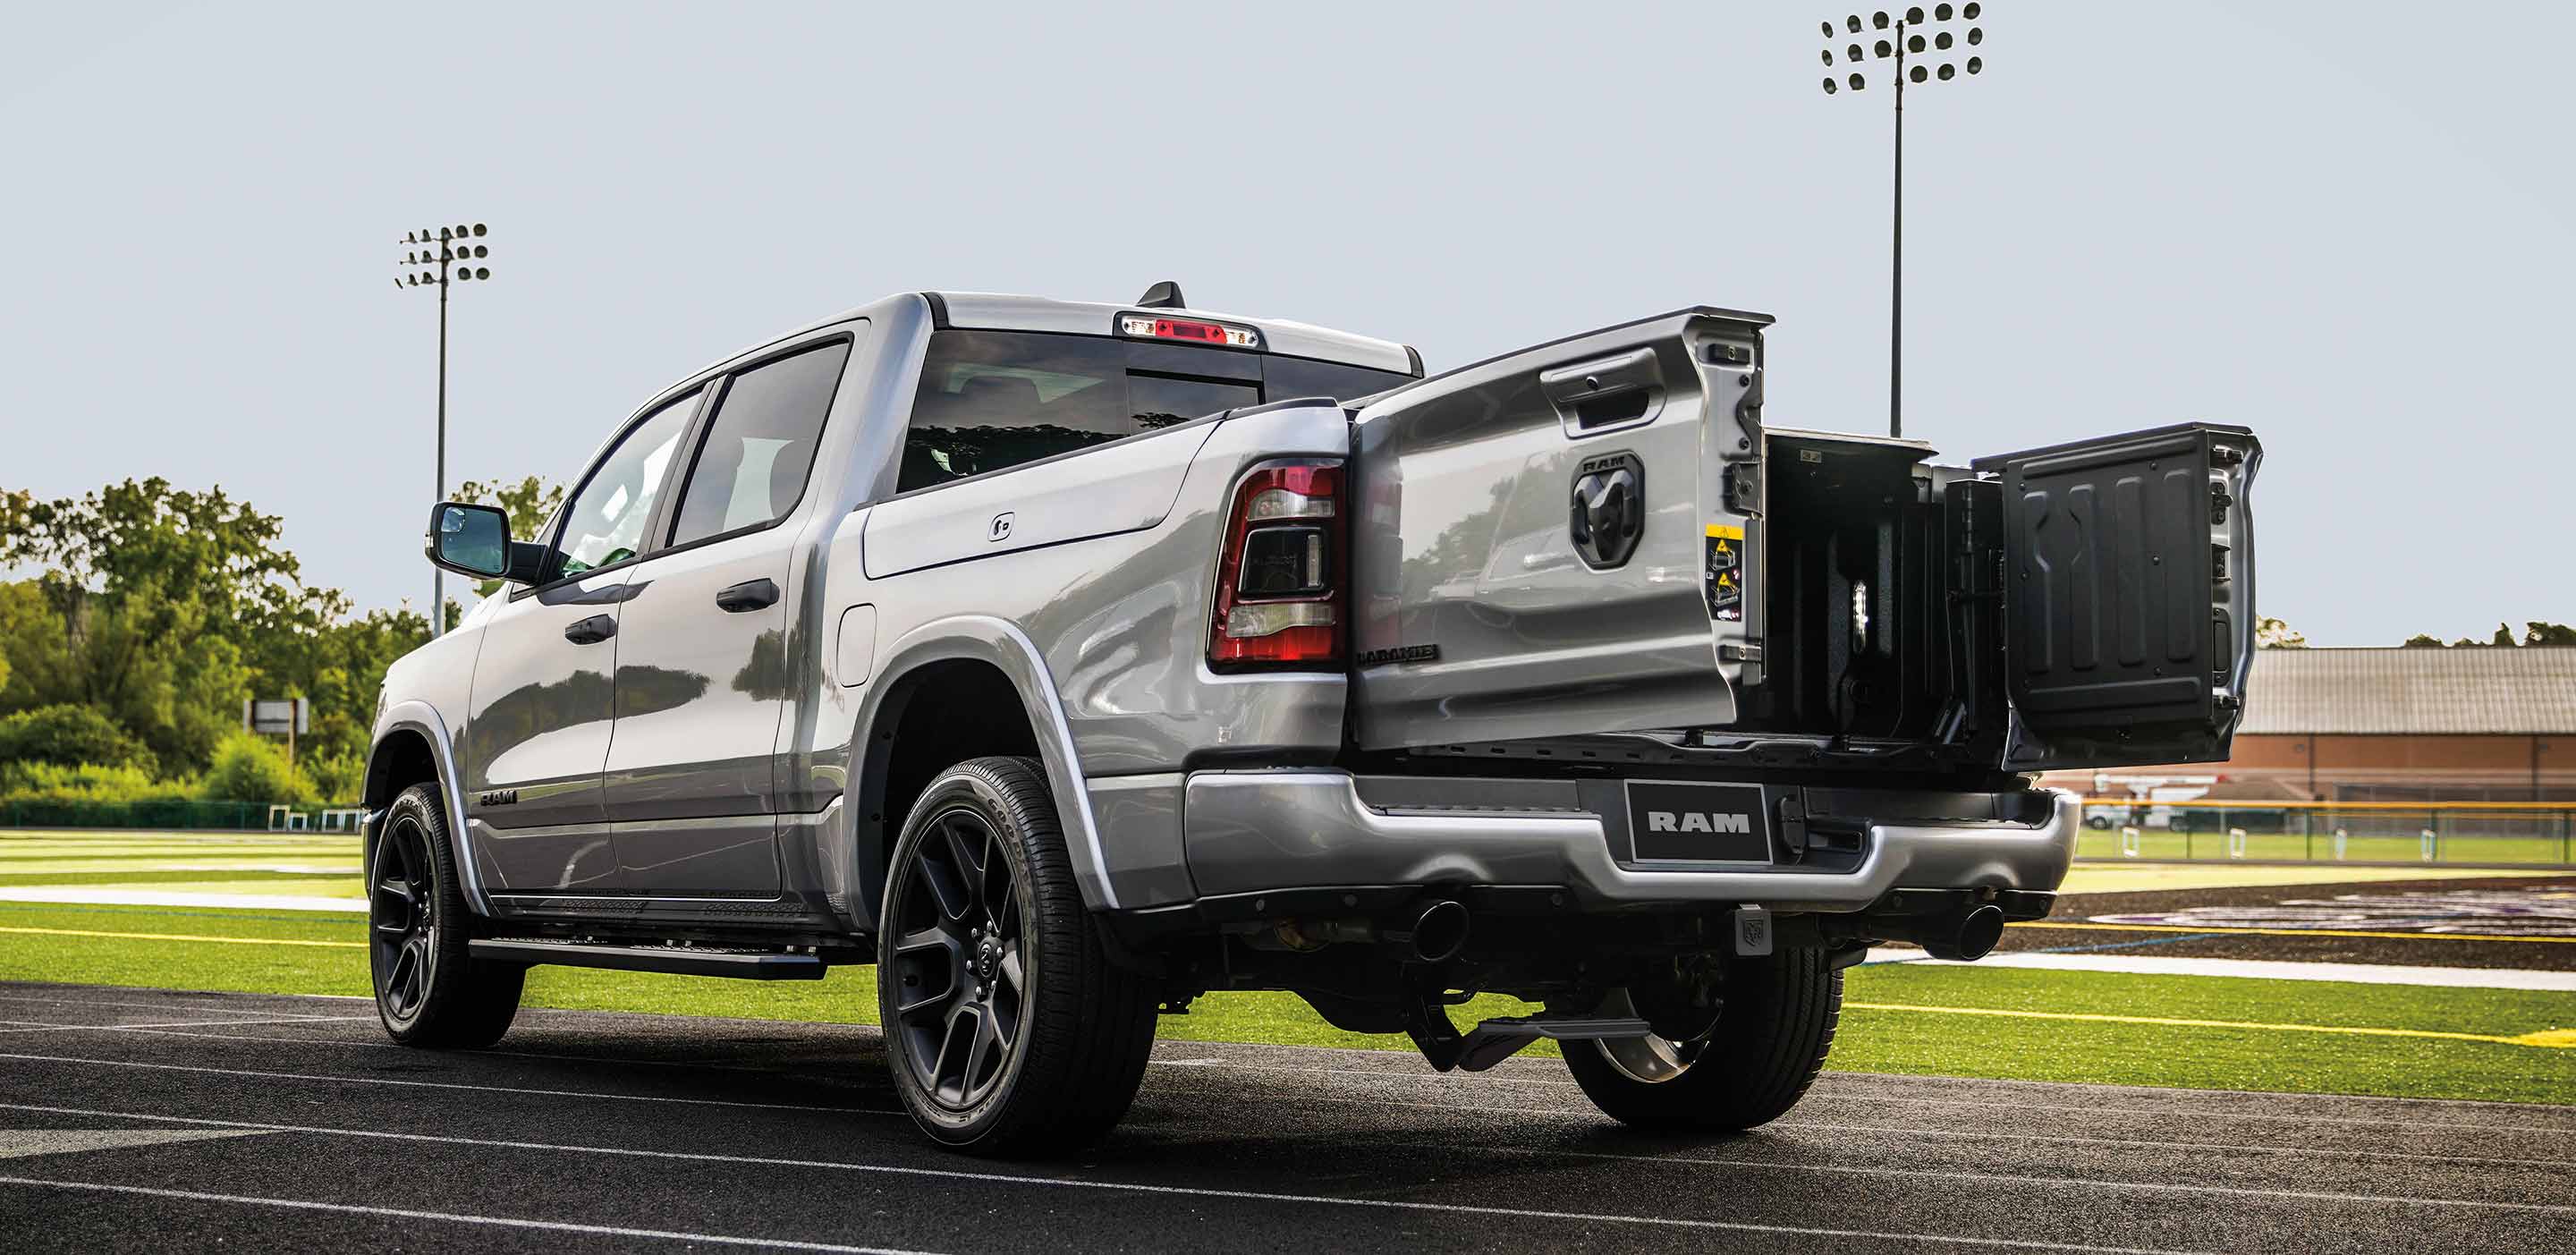 The 2023 Ram 1500 parked on a racetrack with the swing-open tailgate doors open.